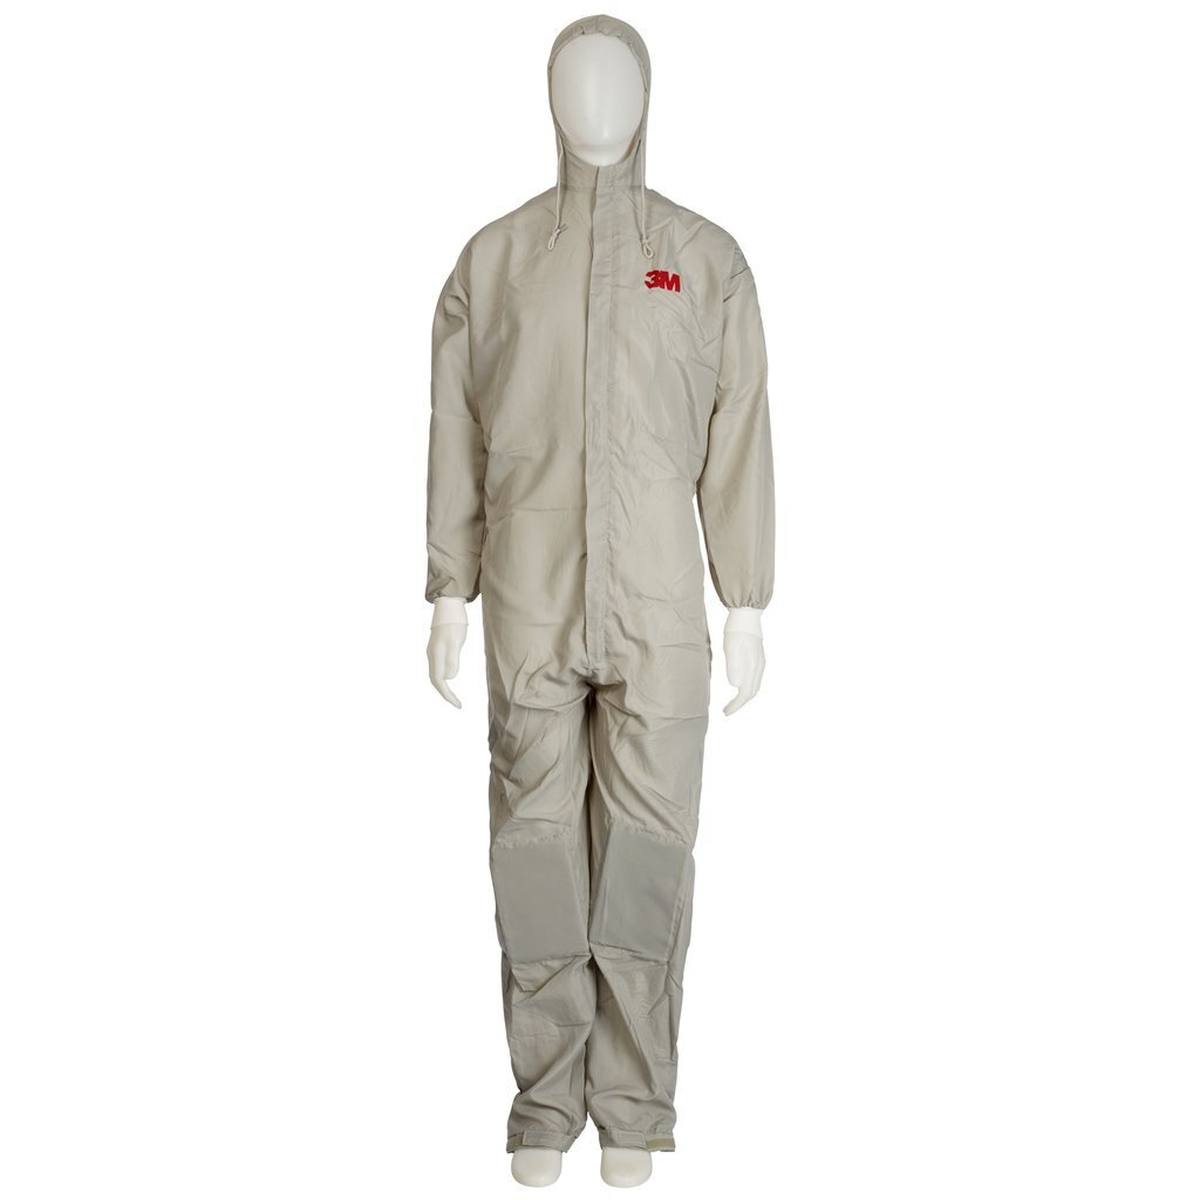 3M 50425 Protective coverall, size XXL, breathable, knee pads, trouser pockets, material lightweight polyester fabric, side trouser pockets, openings in the back for heat dissipation